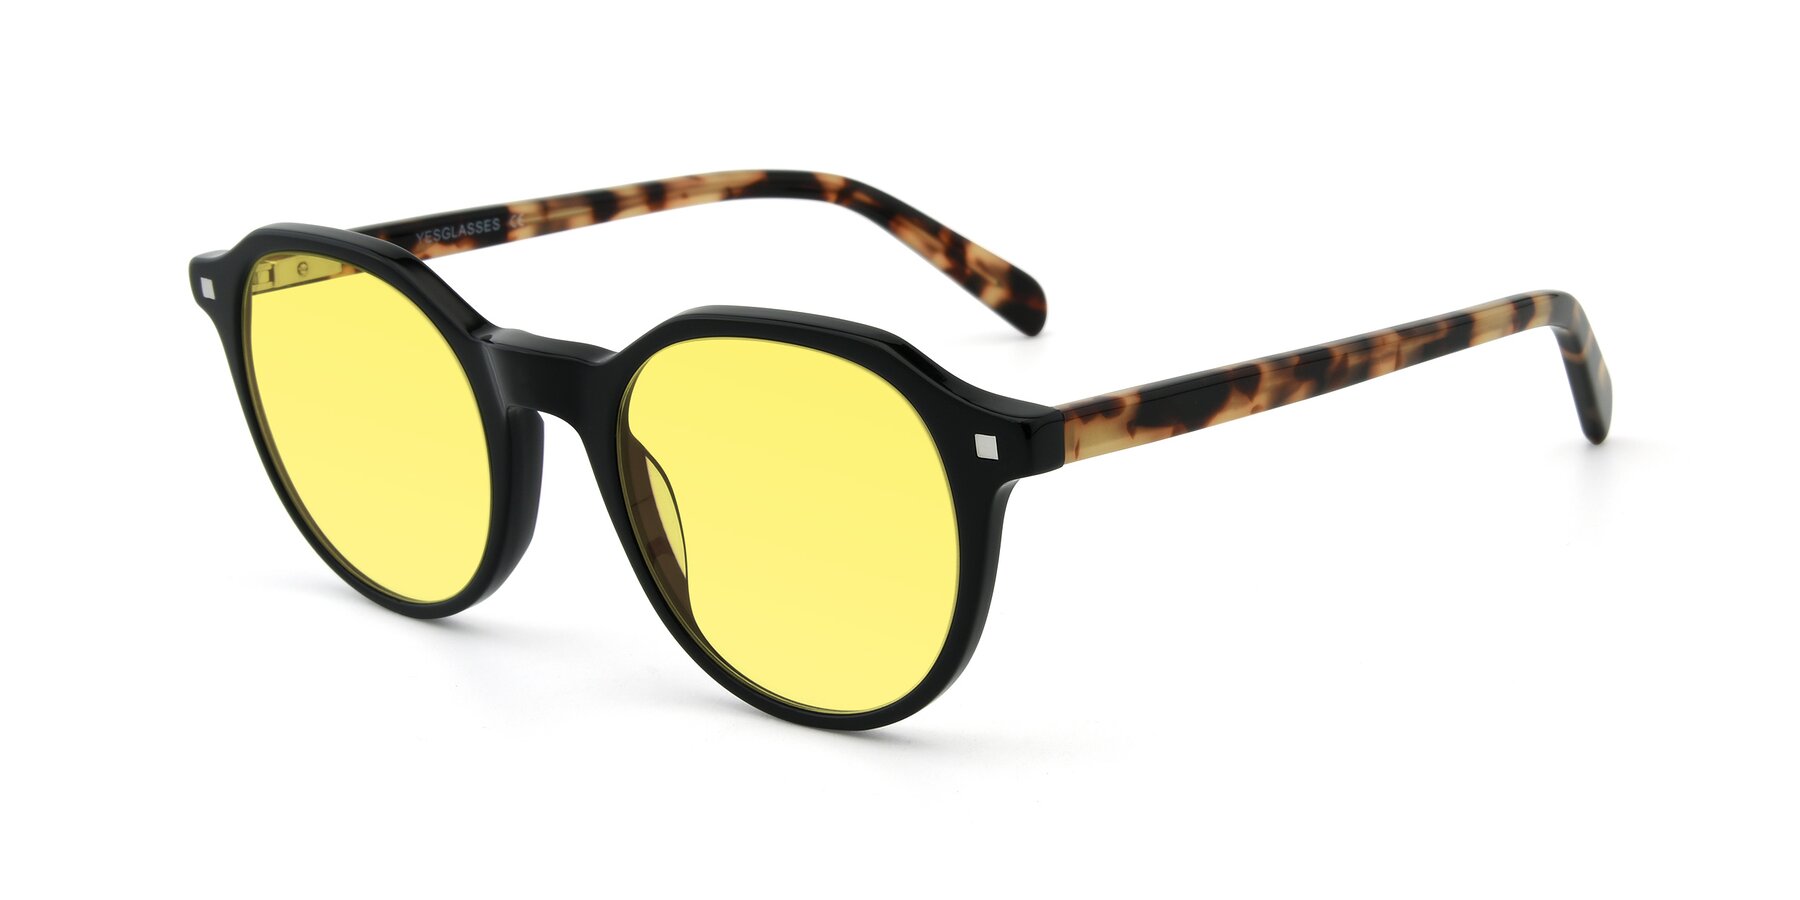 Angle of 17425 in Black with Medium Yellow Tinted Lenses